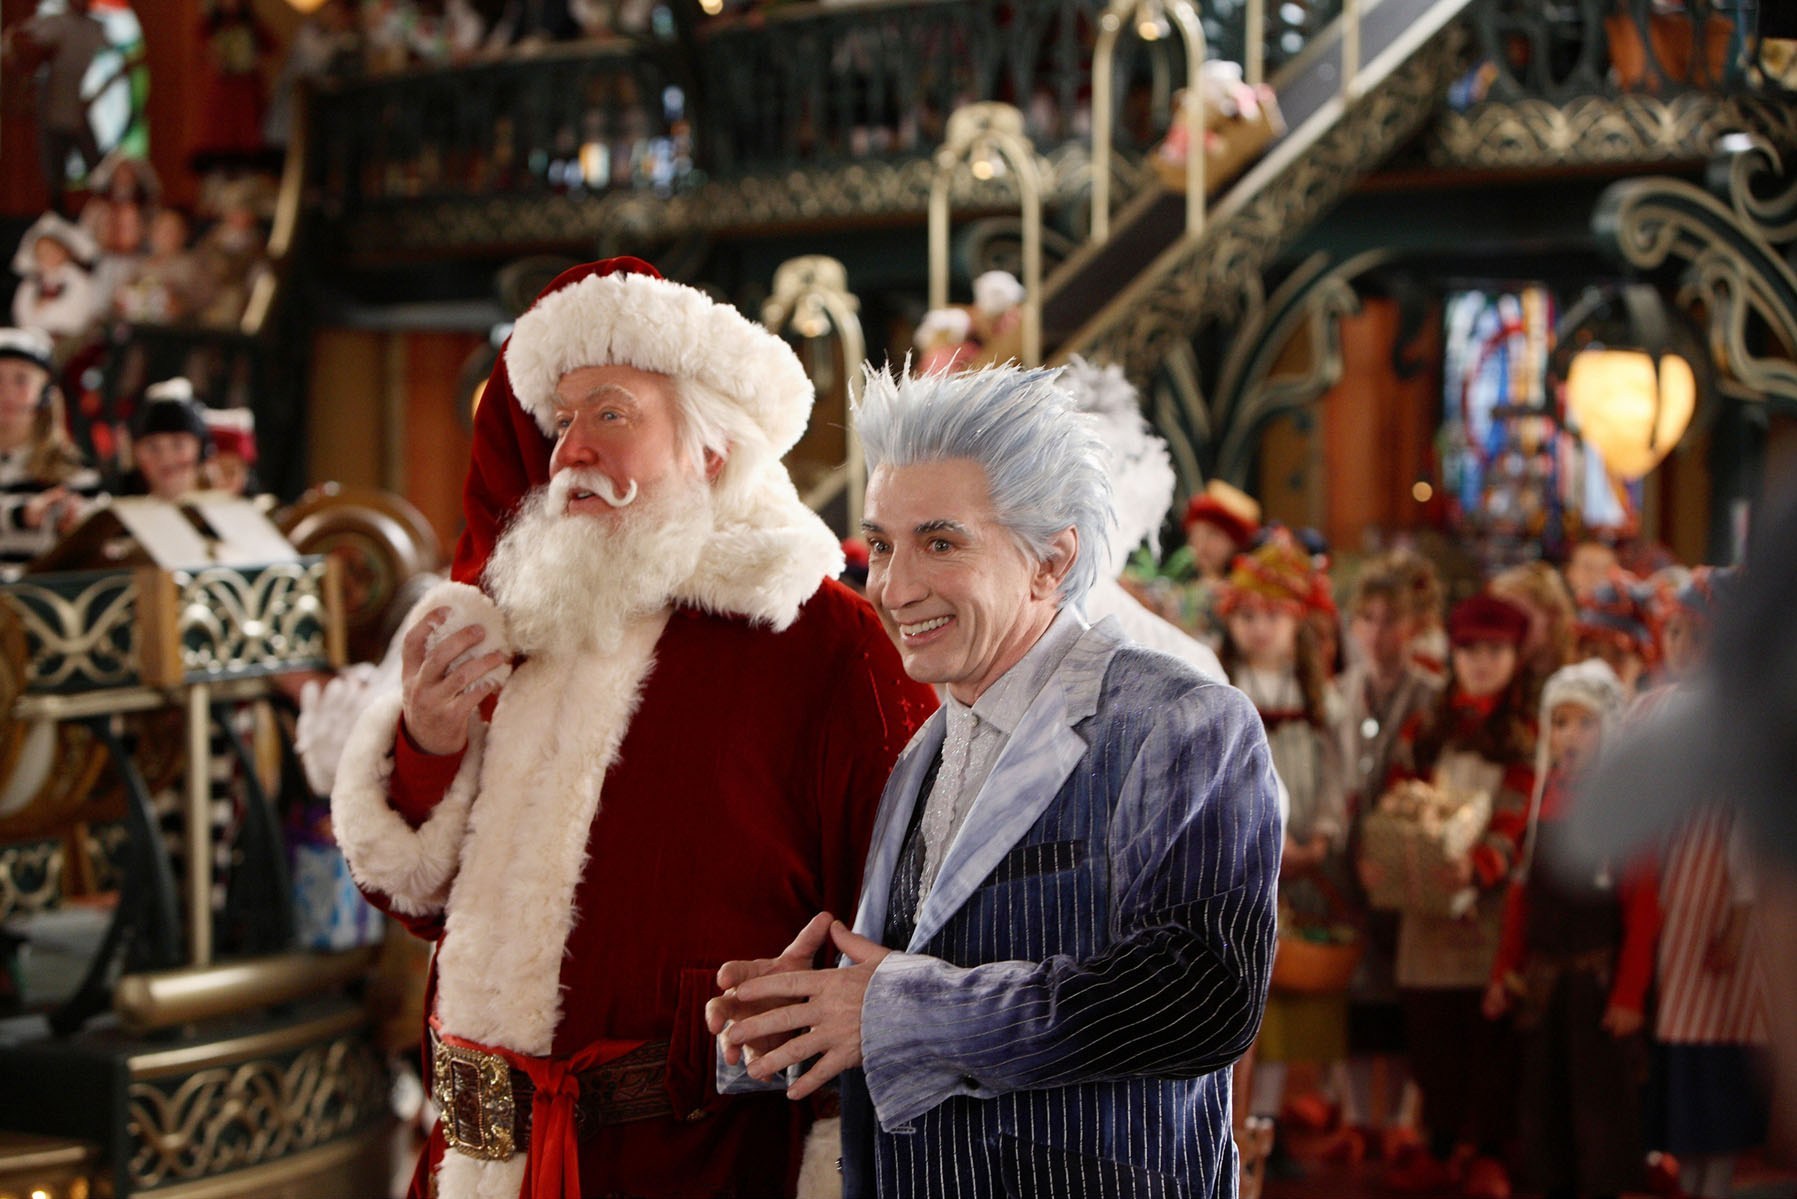 Still of Tim Allen and Martin Short in The Santa Clause 3: The Escape Clause (2006)